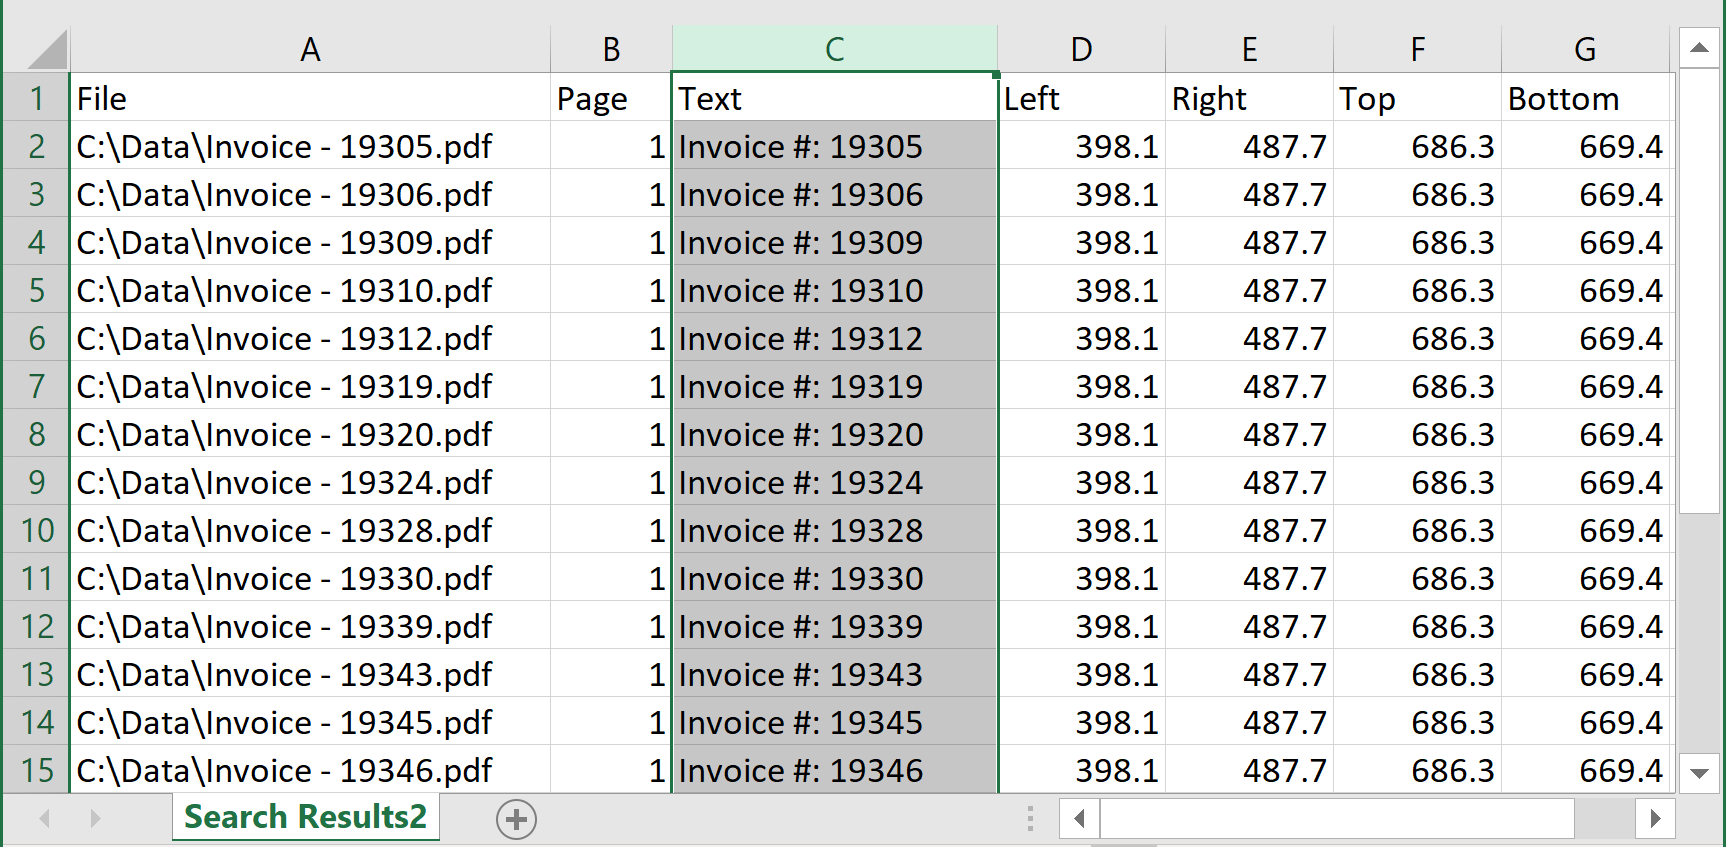 Output results in a spreadsheet format